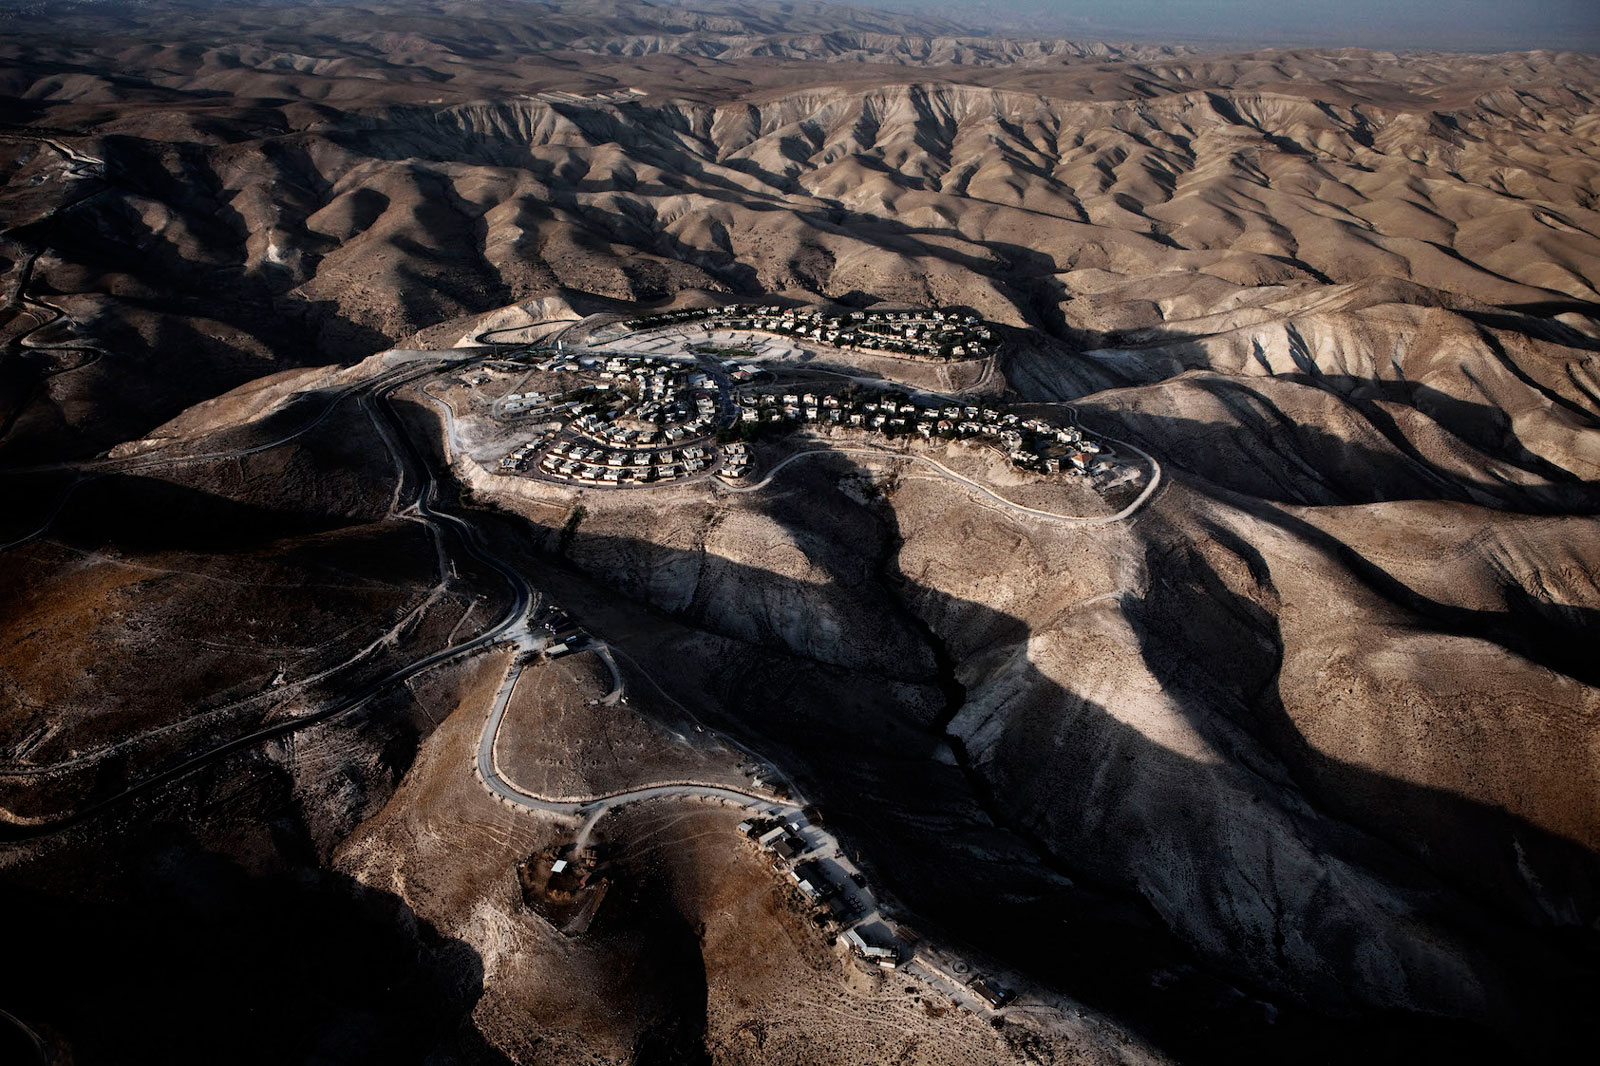 An Israeli settlement in the West Bank, 2009